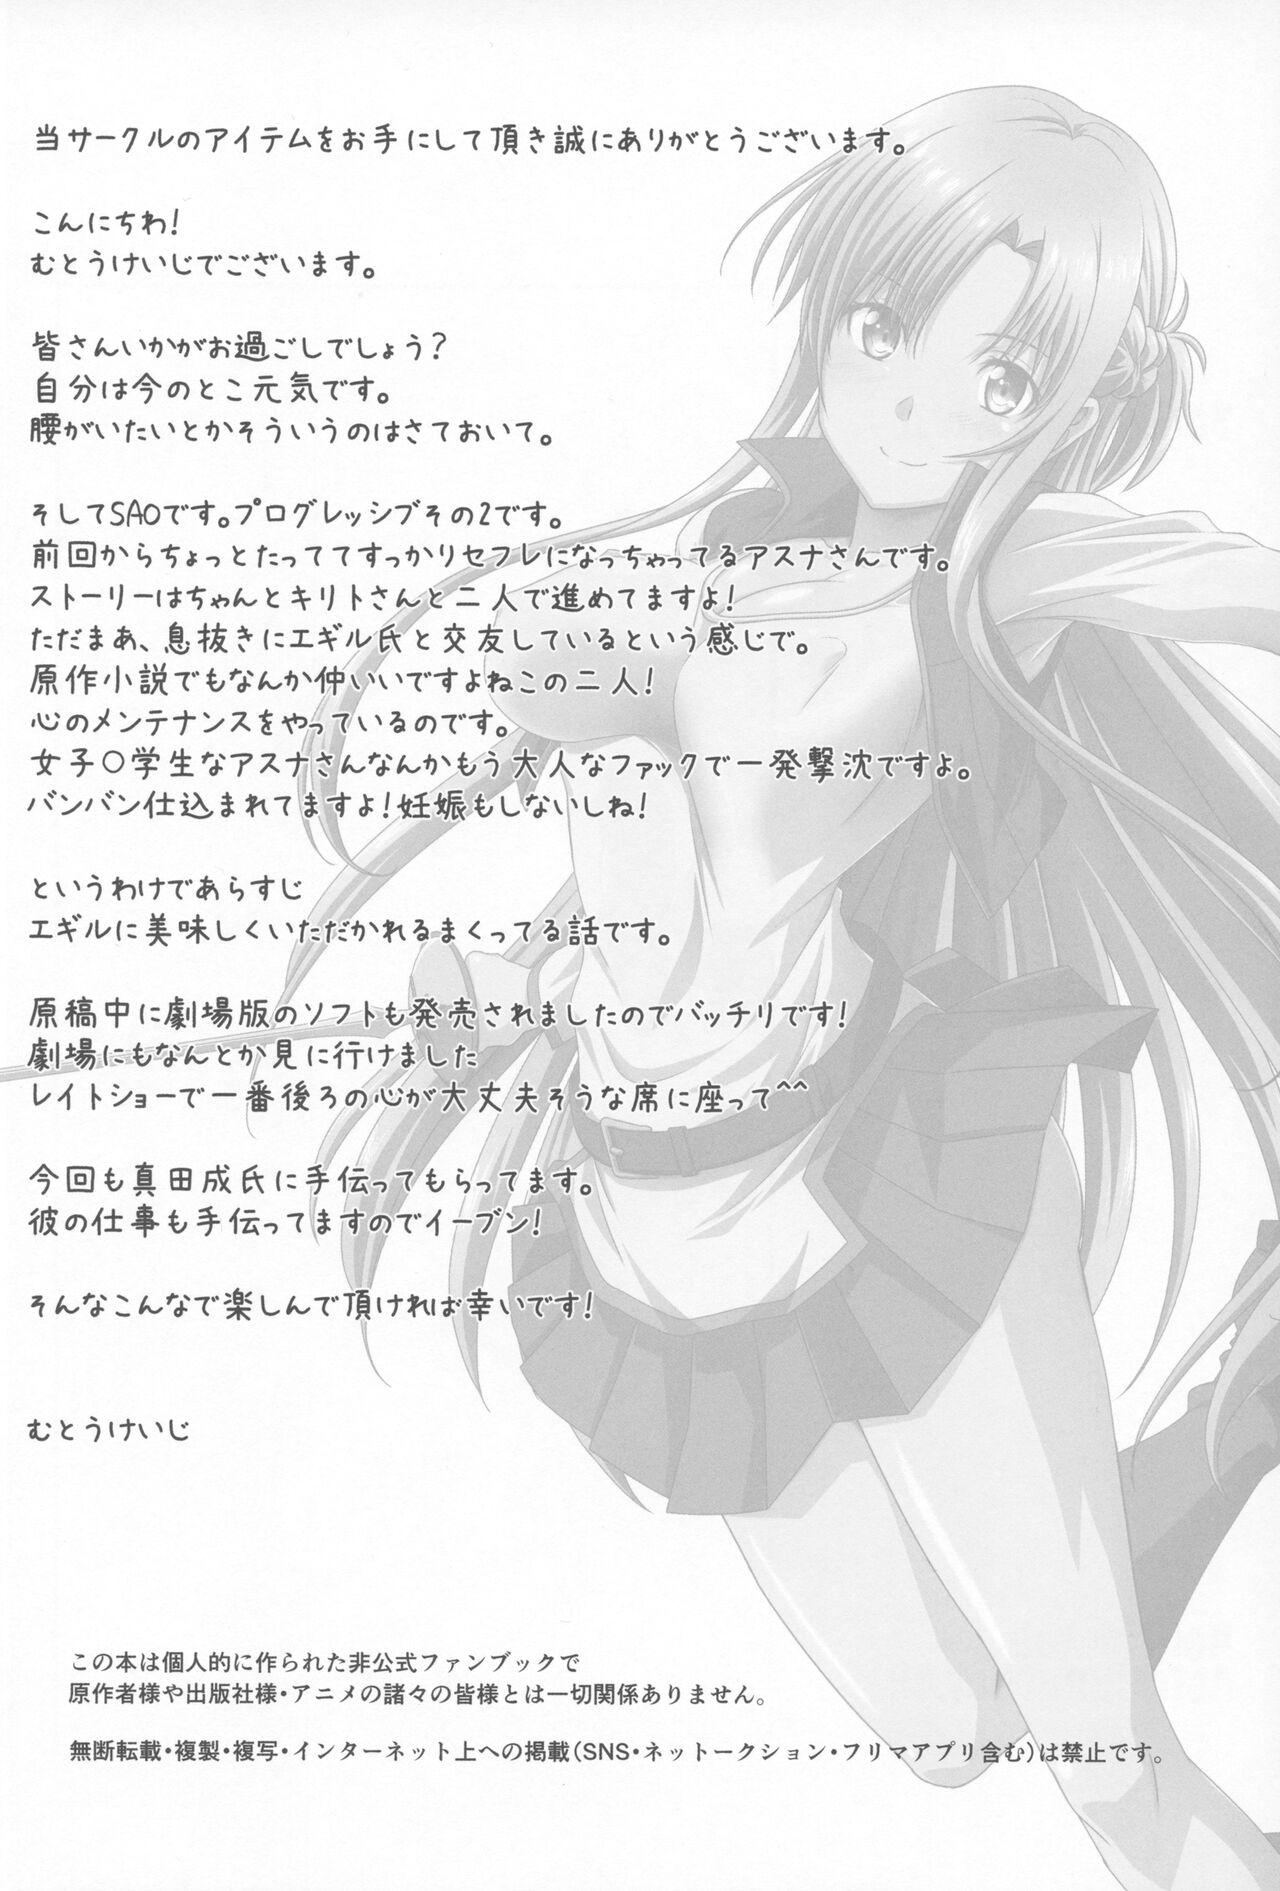 Shy Astral Bout Ver. 45 - Sword art online Blond - Page 3